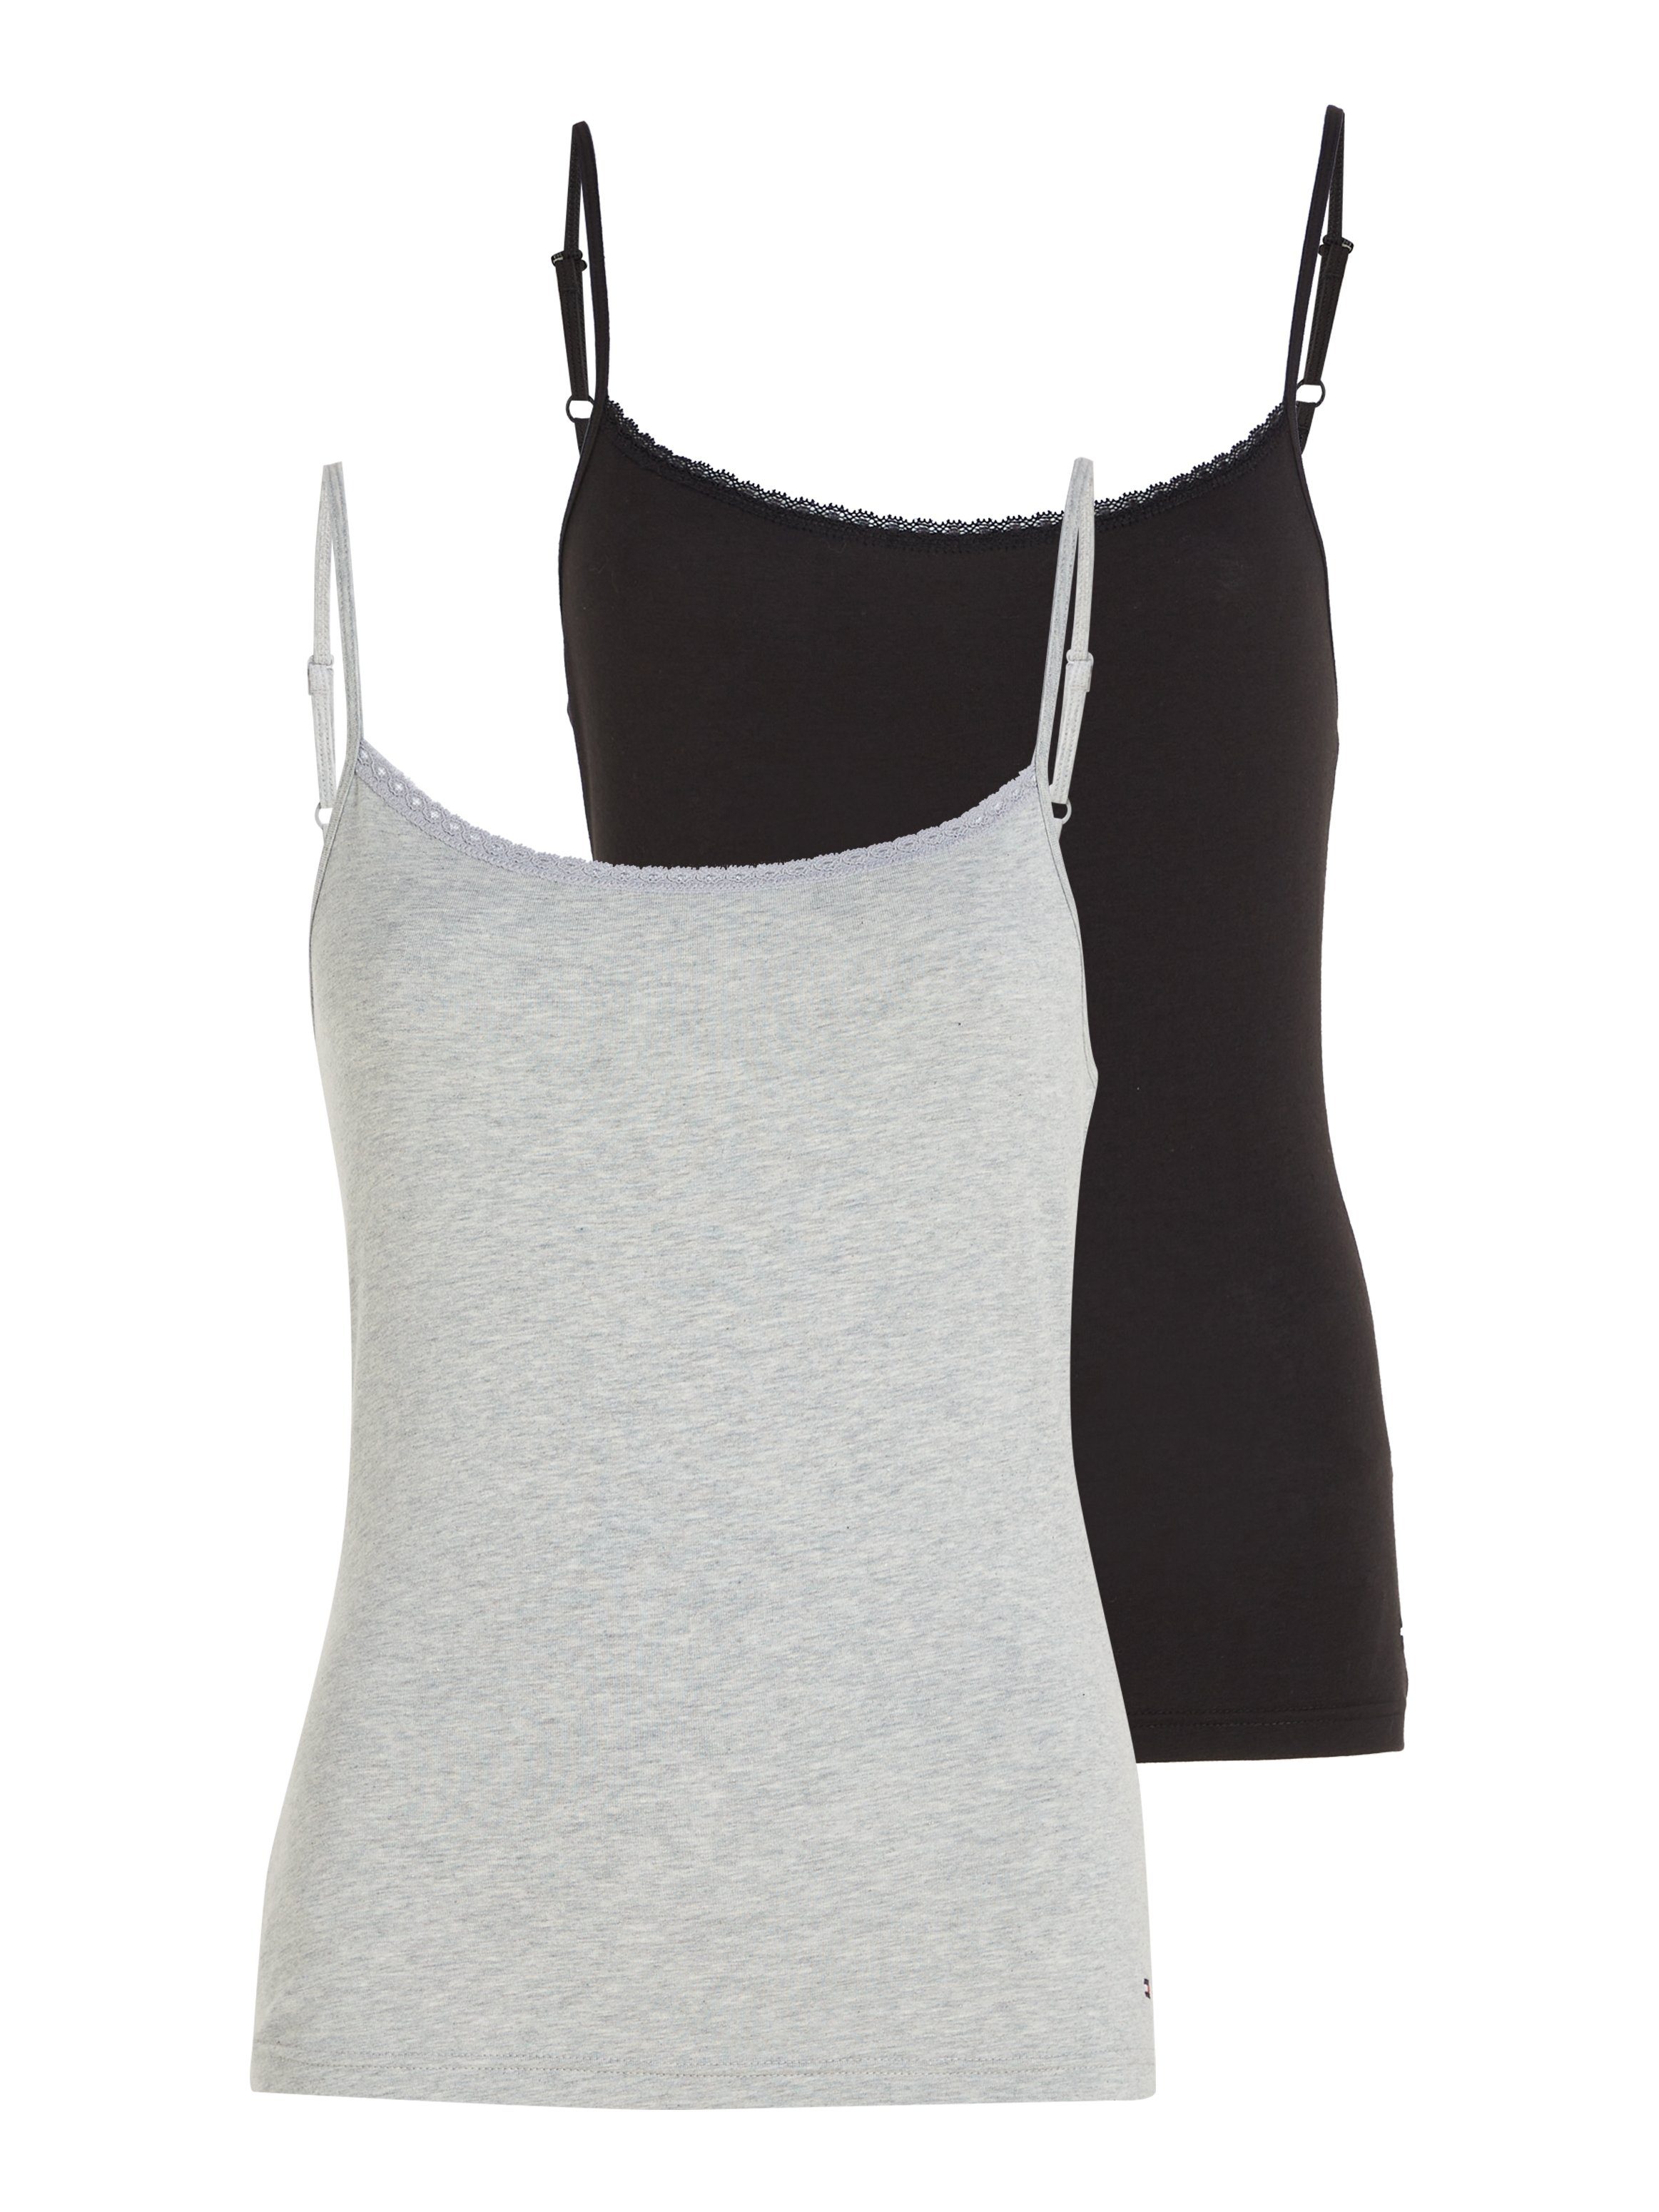 2er-Pack) (Packung, PACK Black/Grey_Heather Hilfiger WITH 2 CAMI Spaghettitop Tommy Underwear LACE